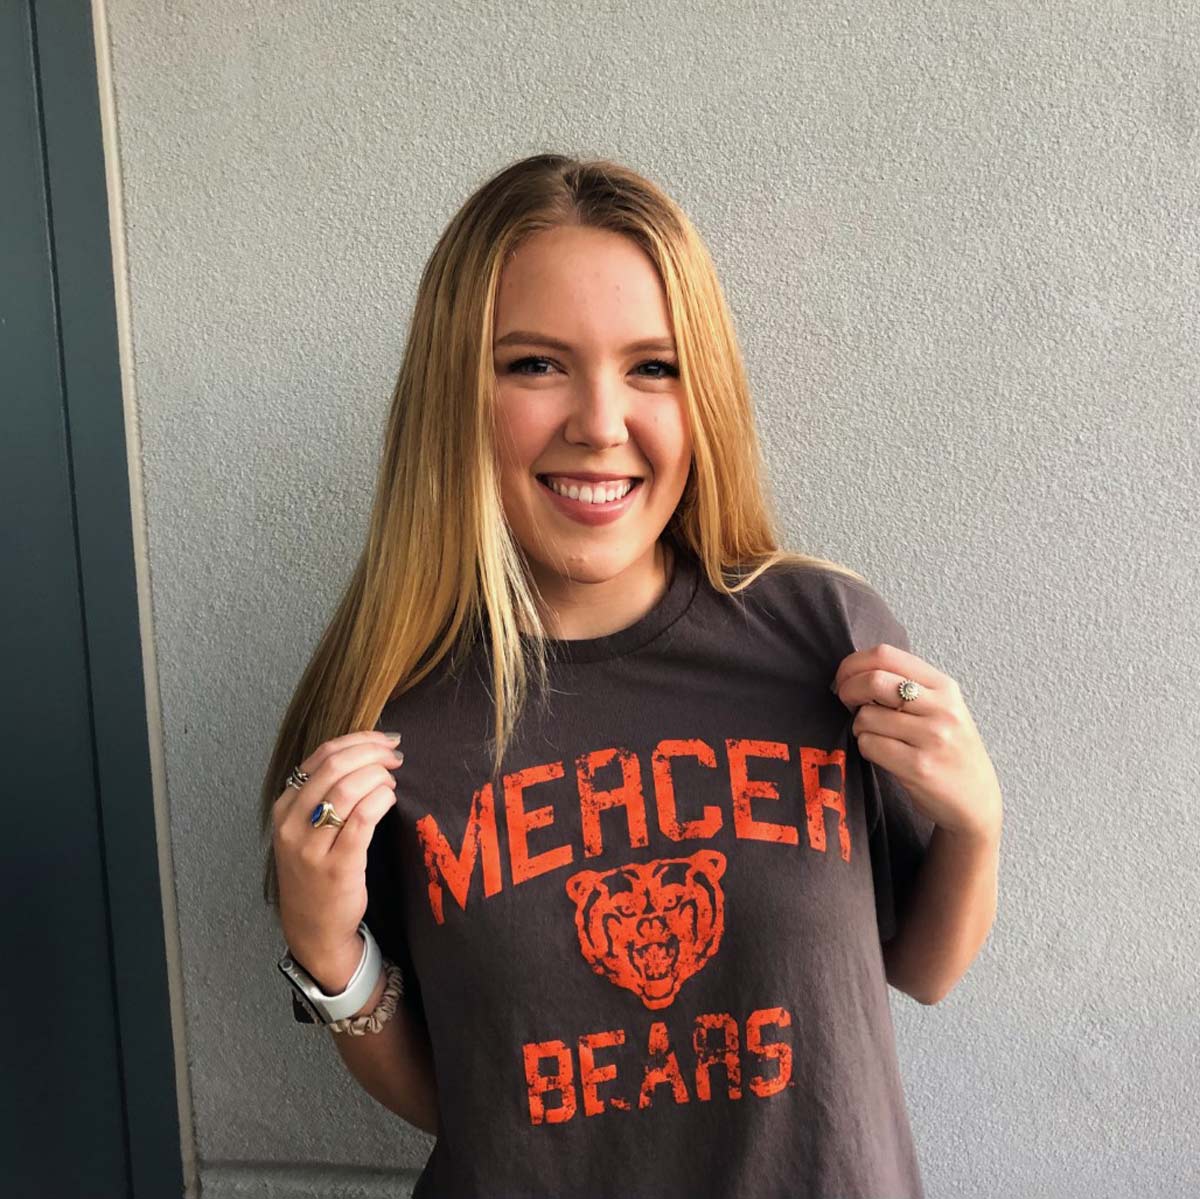  Claire McCarthy sproting a Mercer t-shirt.